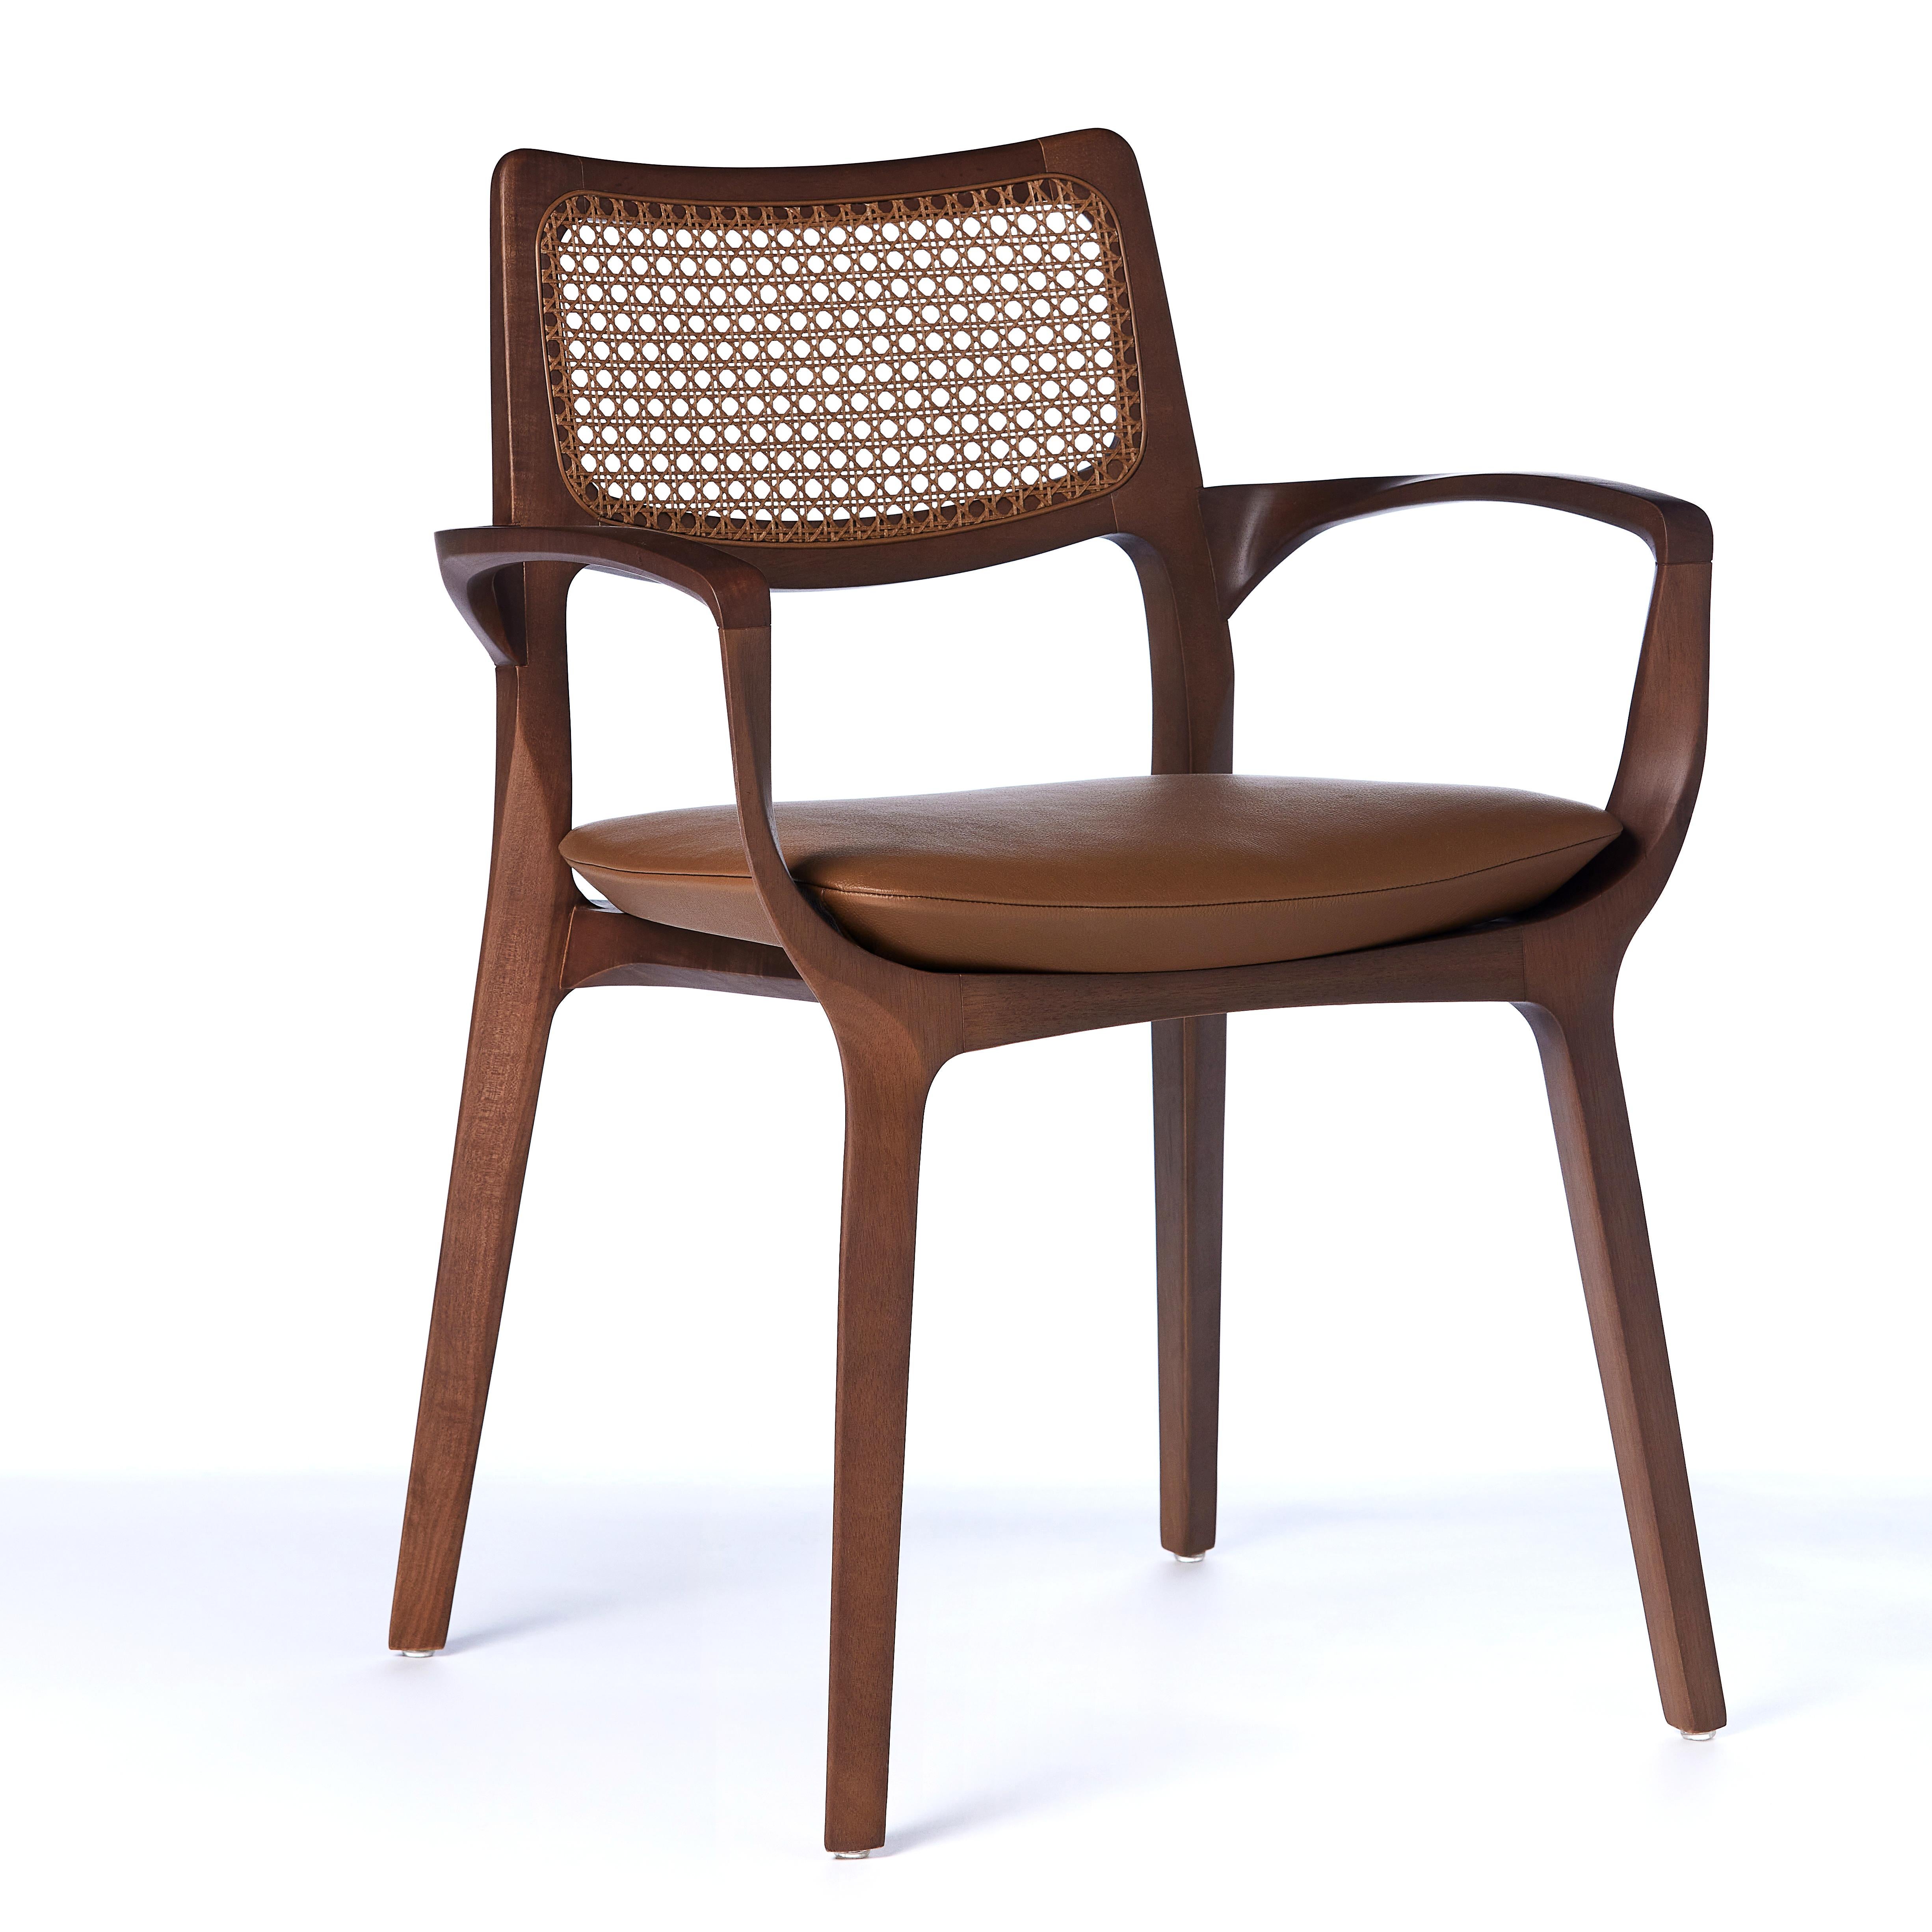 Post-Modern Style Aurora Chair in honey solid wood, vegan leather seating For Sale 8